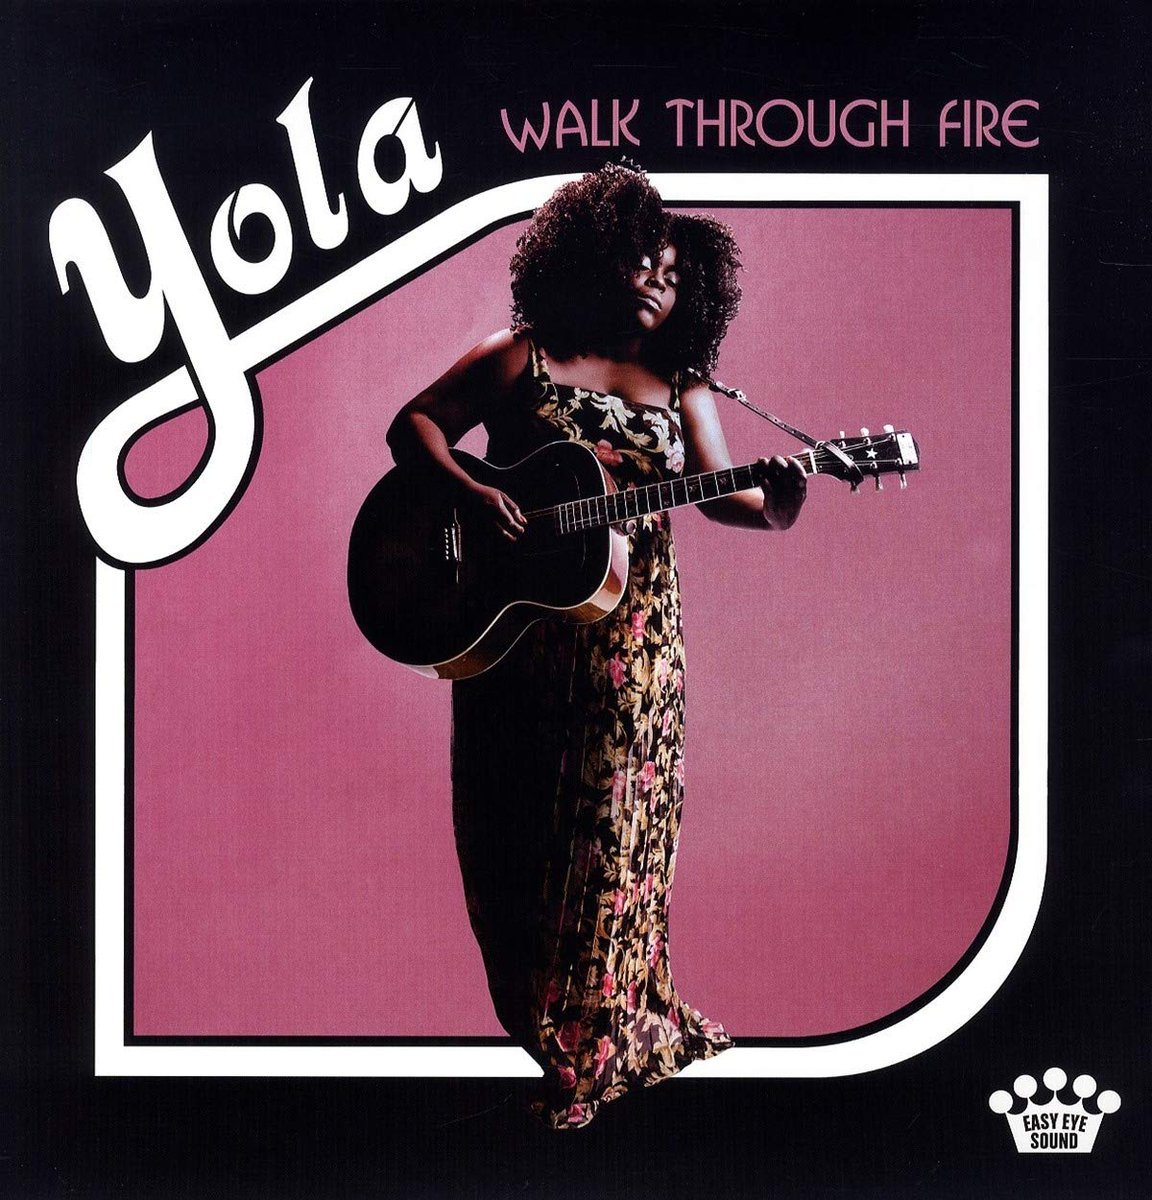 #nowplaying #newrelease ‘Faraway Look’ by @iamyola from her latest album “Walk Through Fire” on @meridianfm #countryradio #countrymusic #countrysoul #AmericanaFest